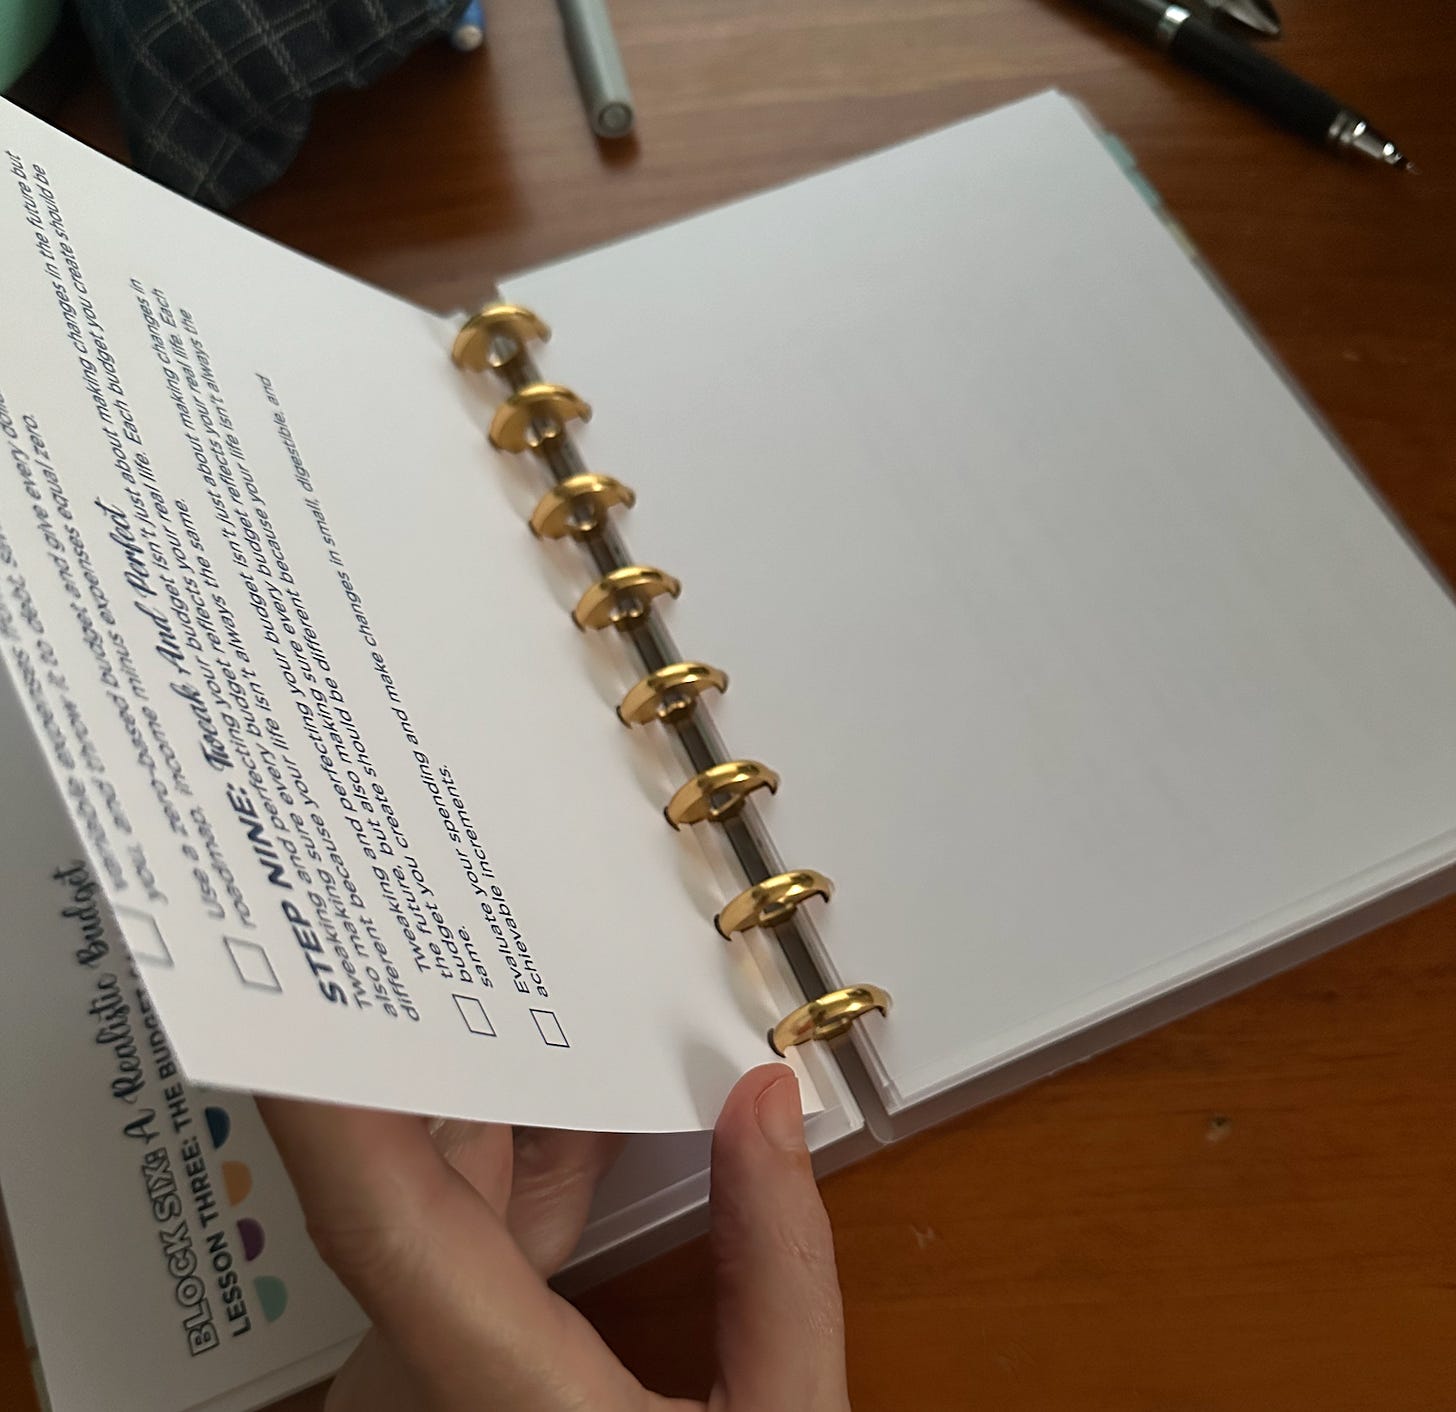 A5 notebook bound with 8 gold aluminium discs is on a wooden desk. A hand is holding the left hand side page up, revealing that one side of each page is A4 paper printed on one side only, cut in half.